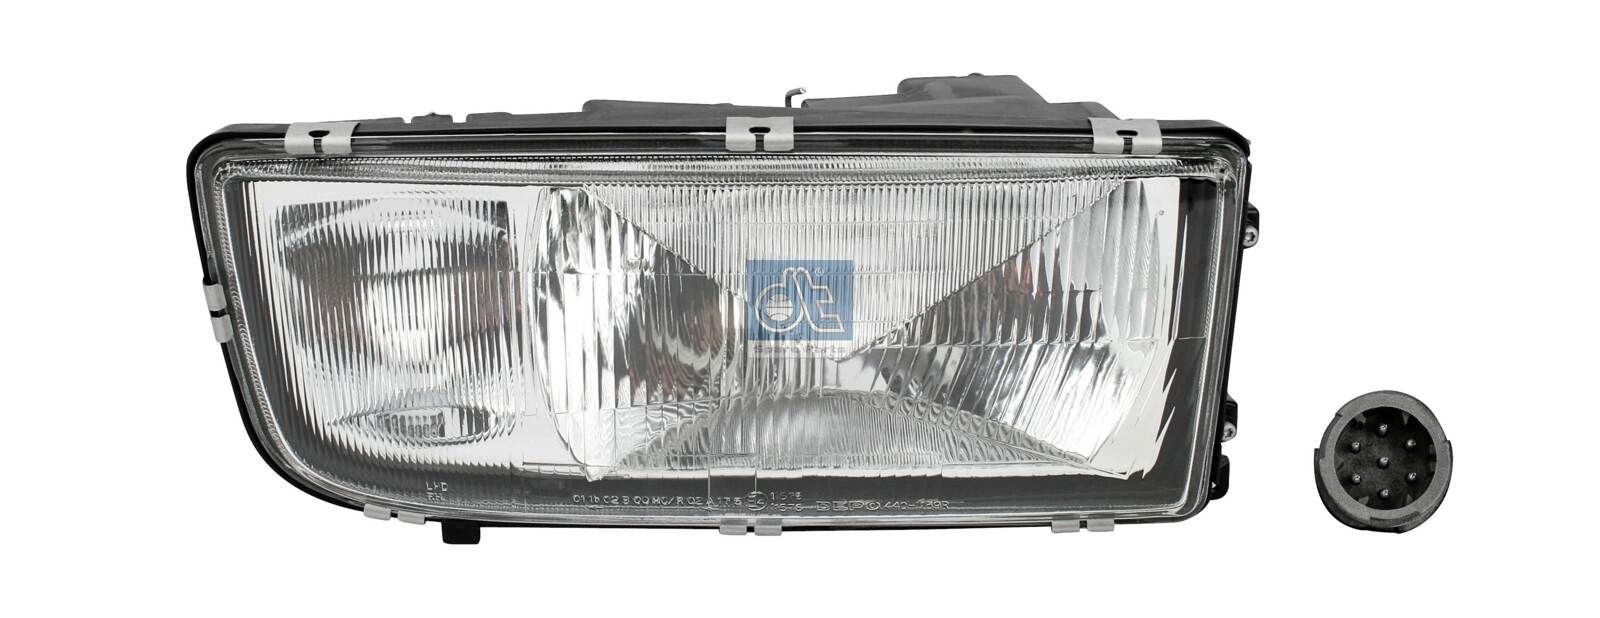 0 301 081 318 DT Spare Parts 4.62322 Headlight A 941 820 62 61